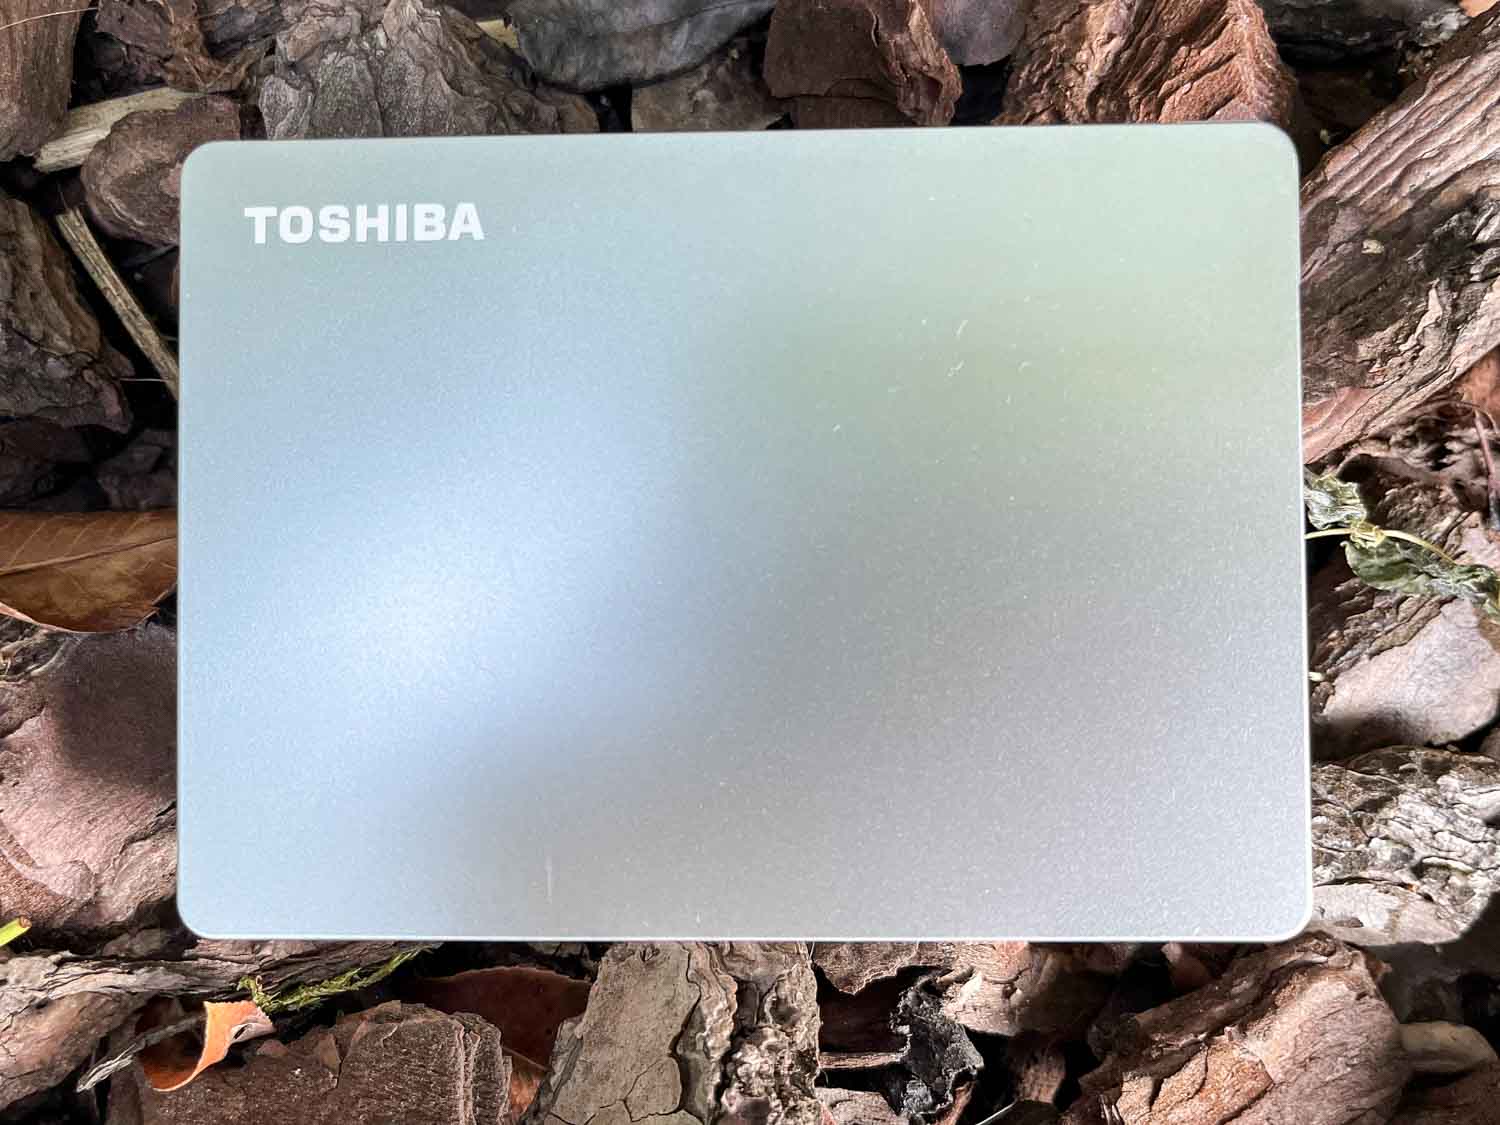 Toshiba Canvio Slim II review: Not so slim, but excellent